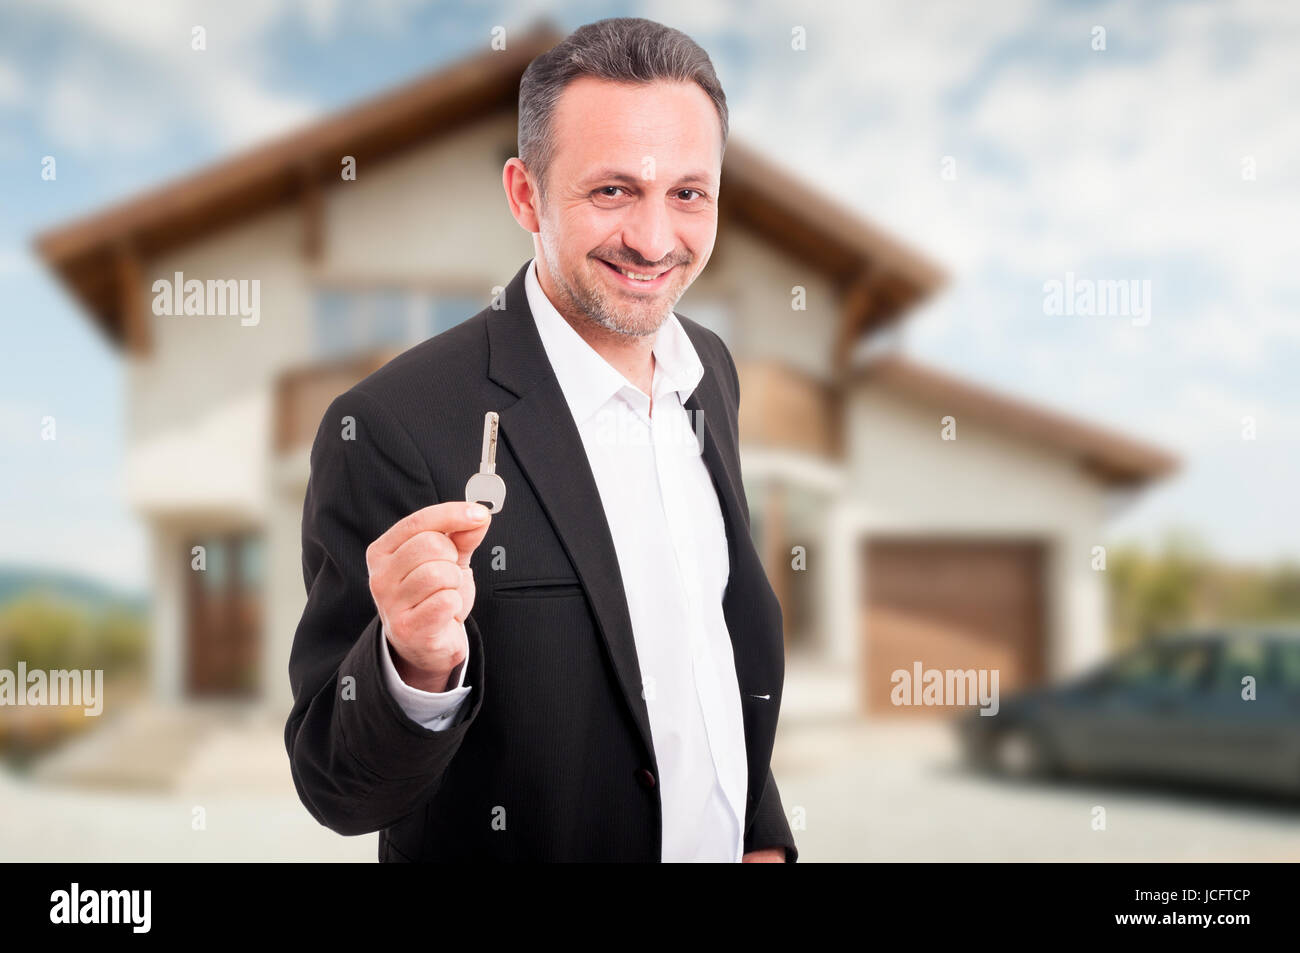 Young realtor offering house keys as real estate selling concept Stock Photo